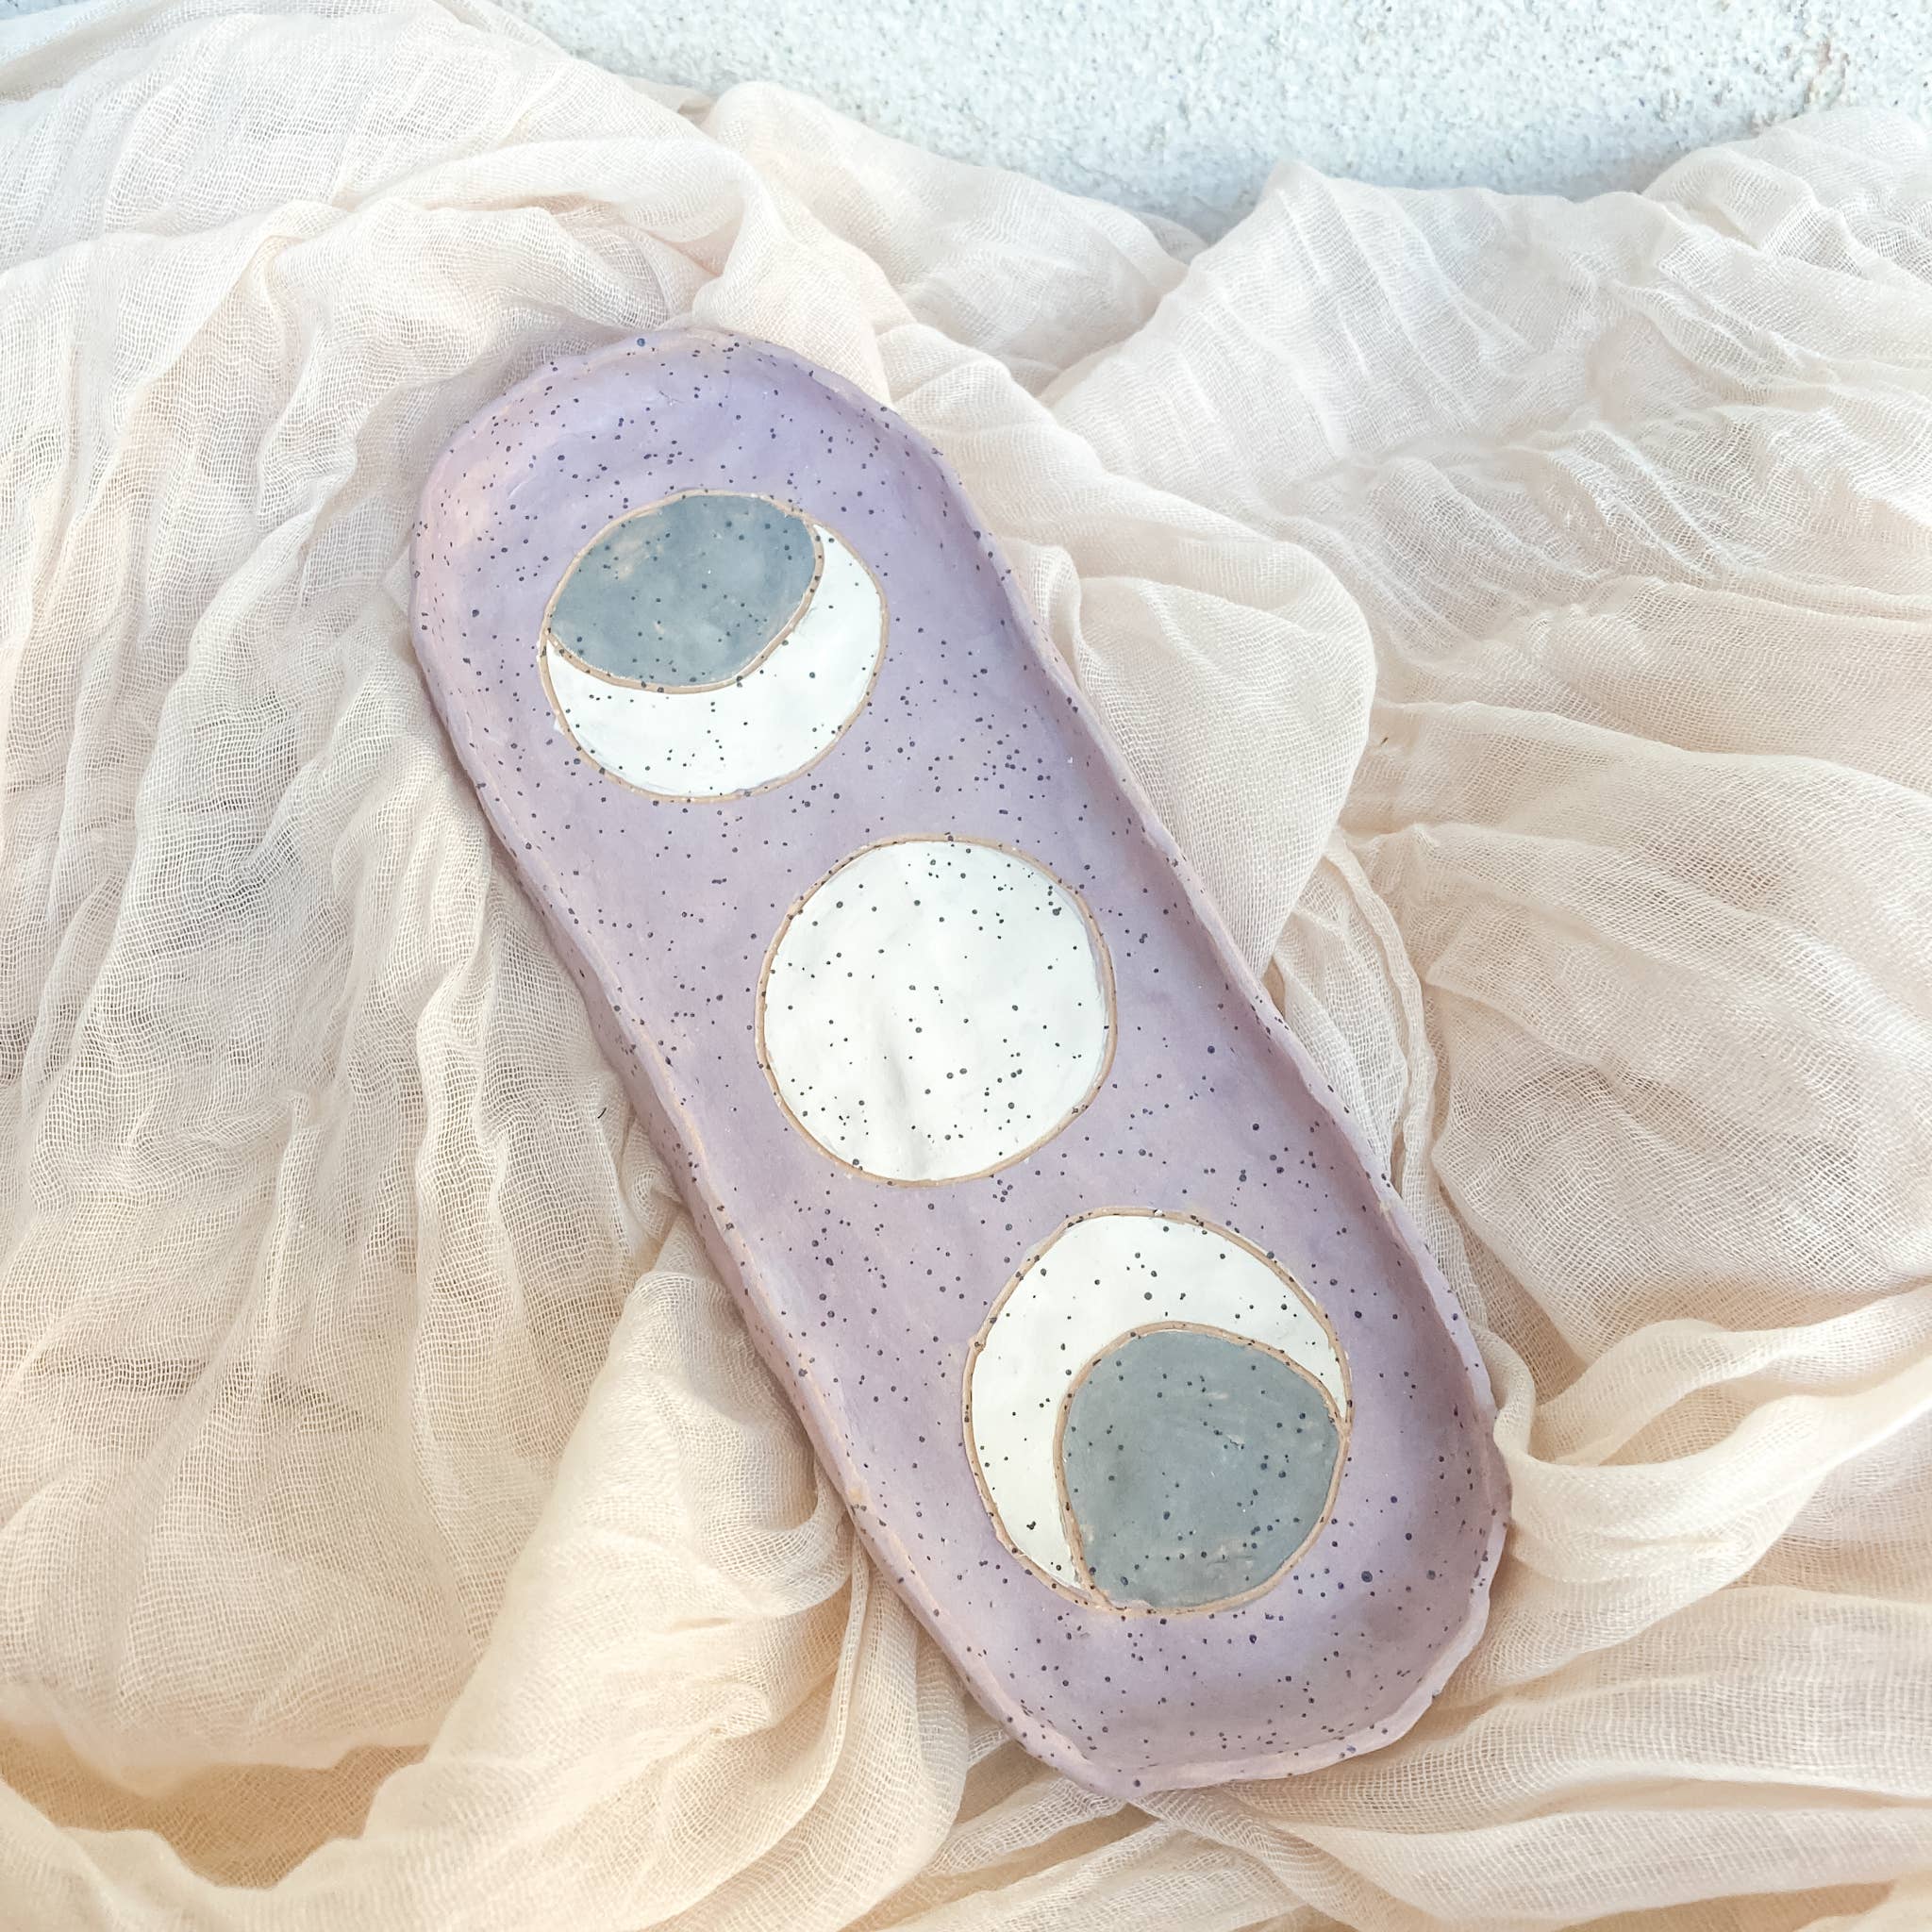 Moon Phases Oval Tray: Lilac